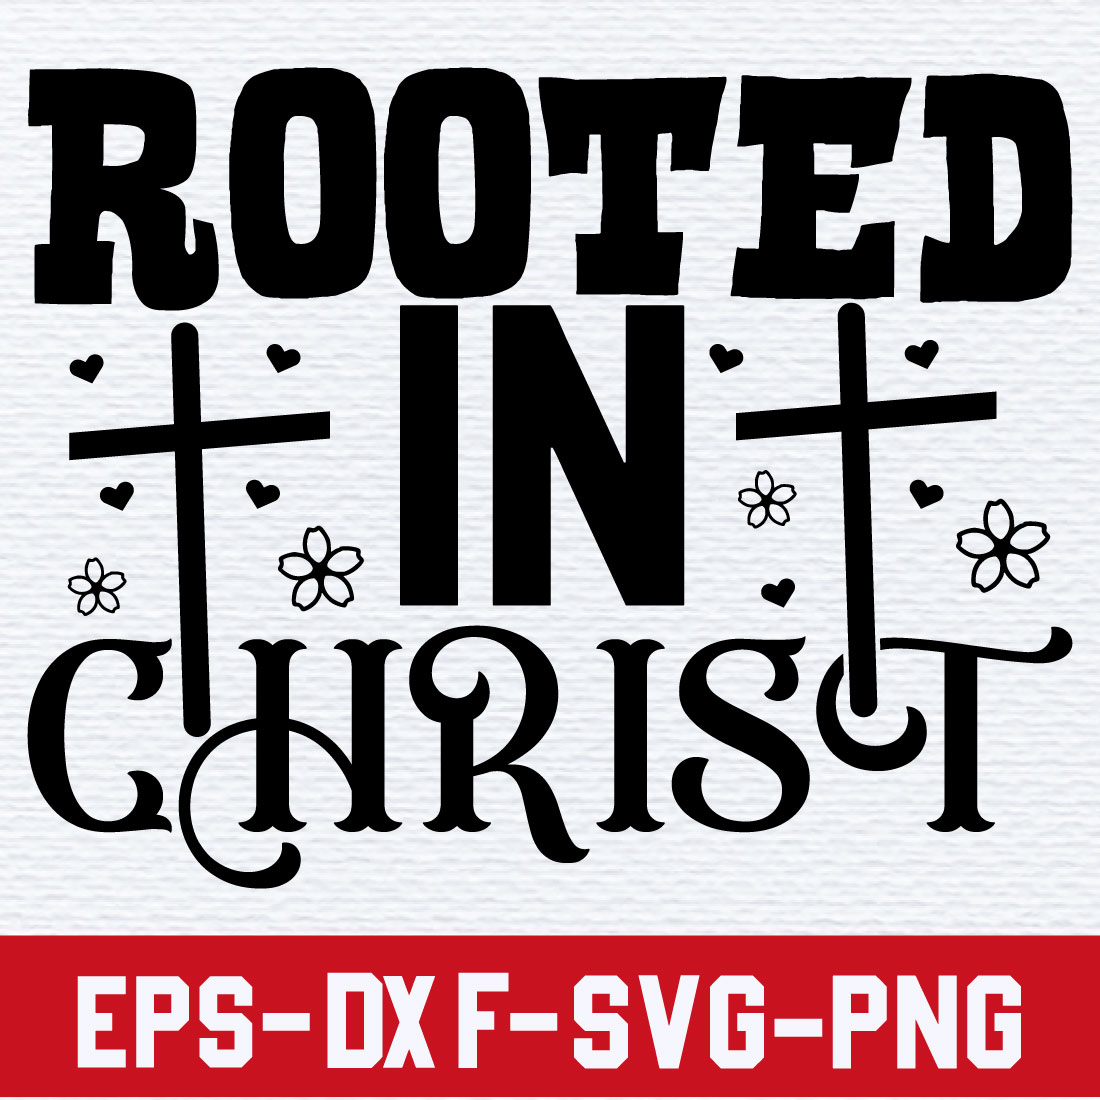 Rooted in christ preview image.